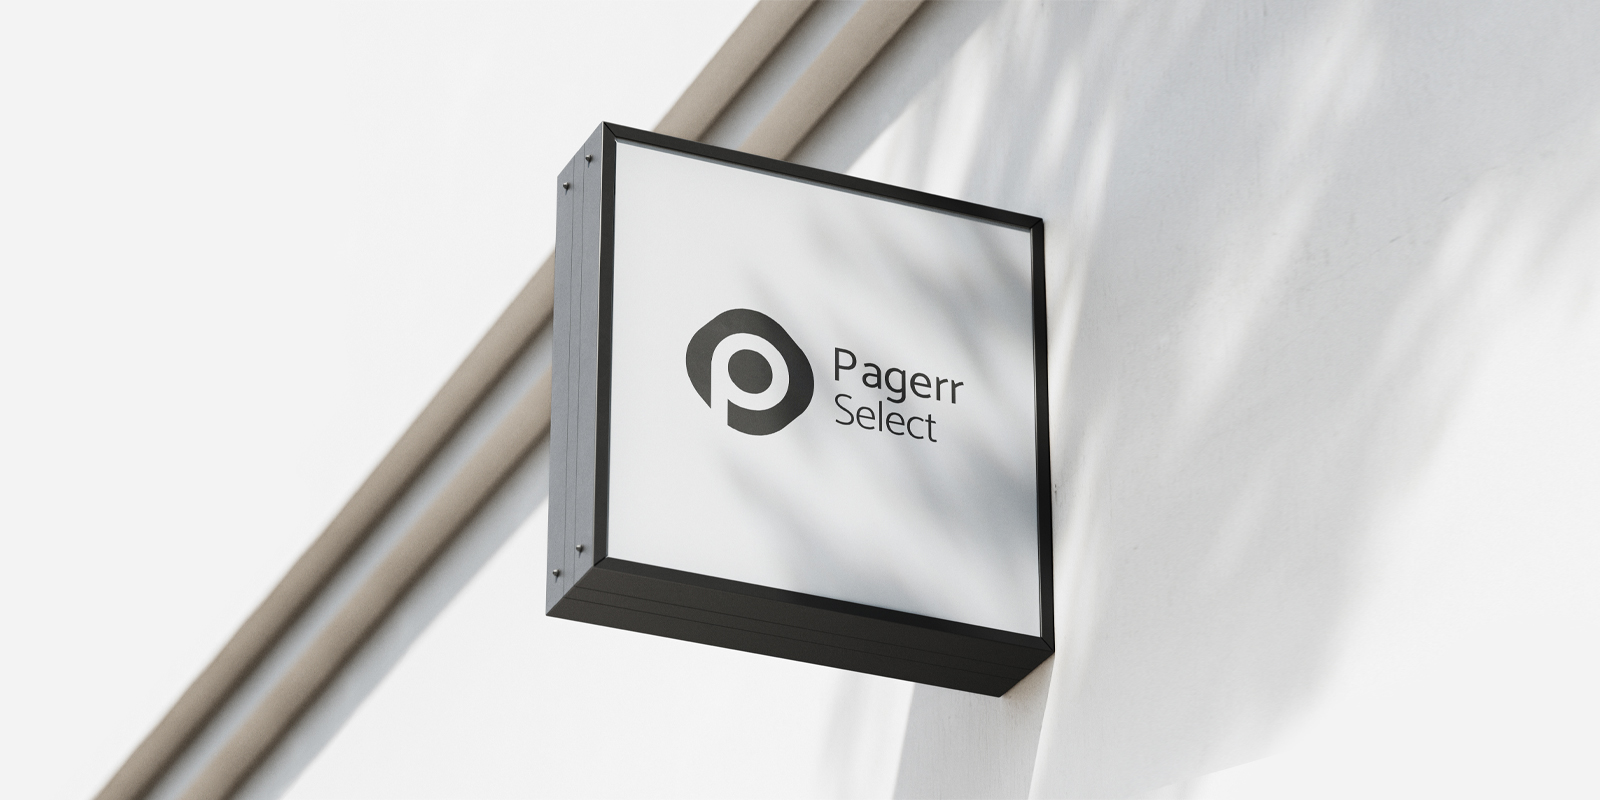 Essential signs in Warsaw - Print with Pagerr